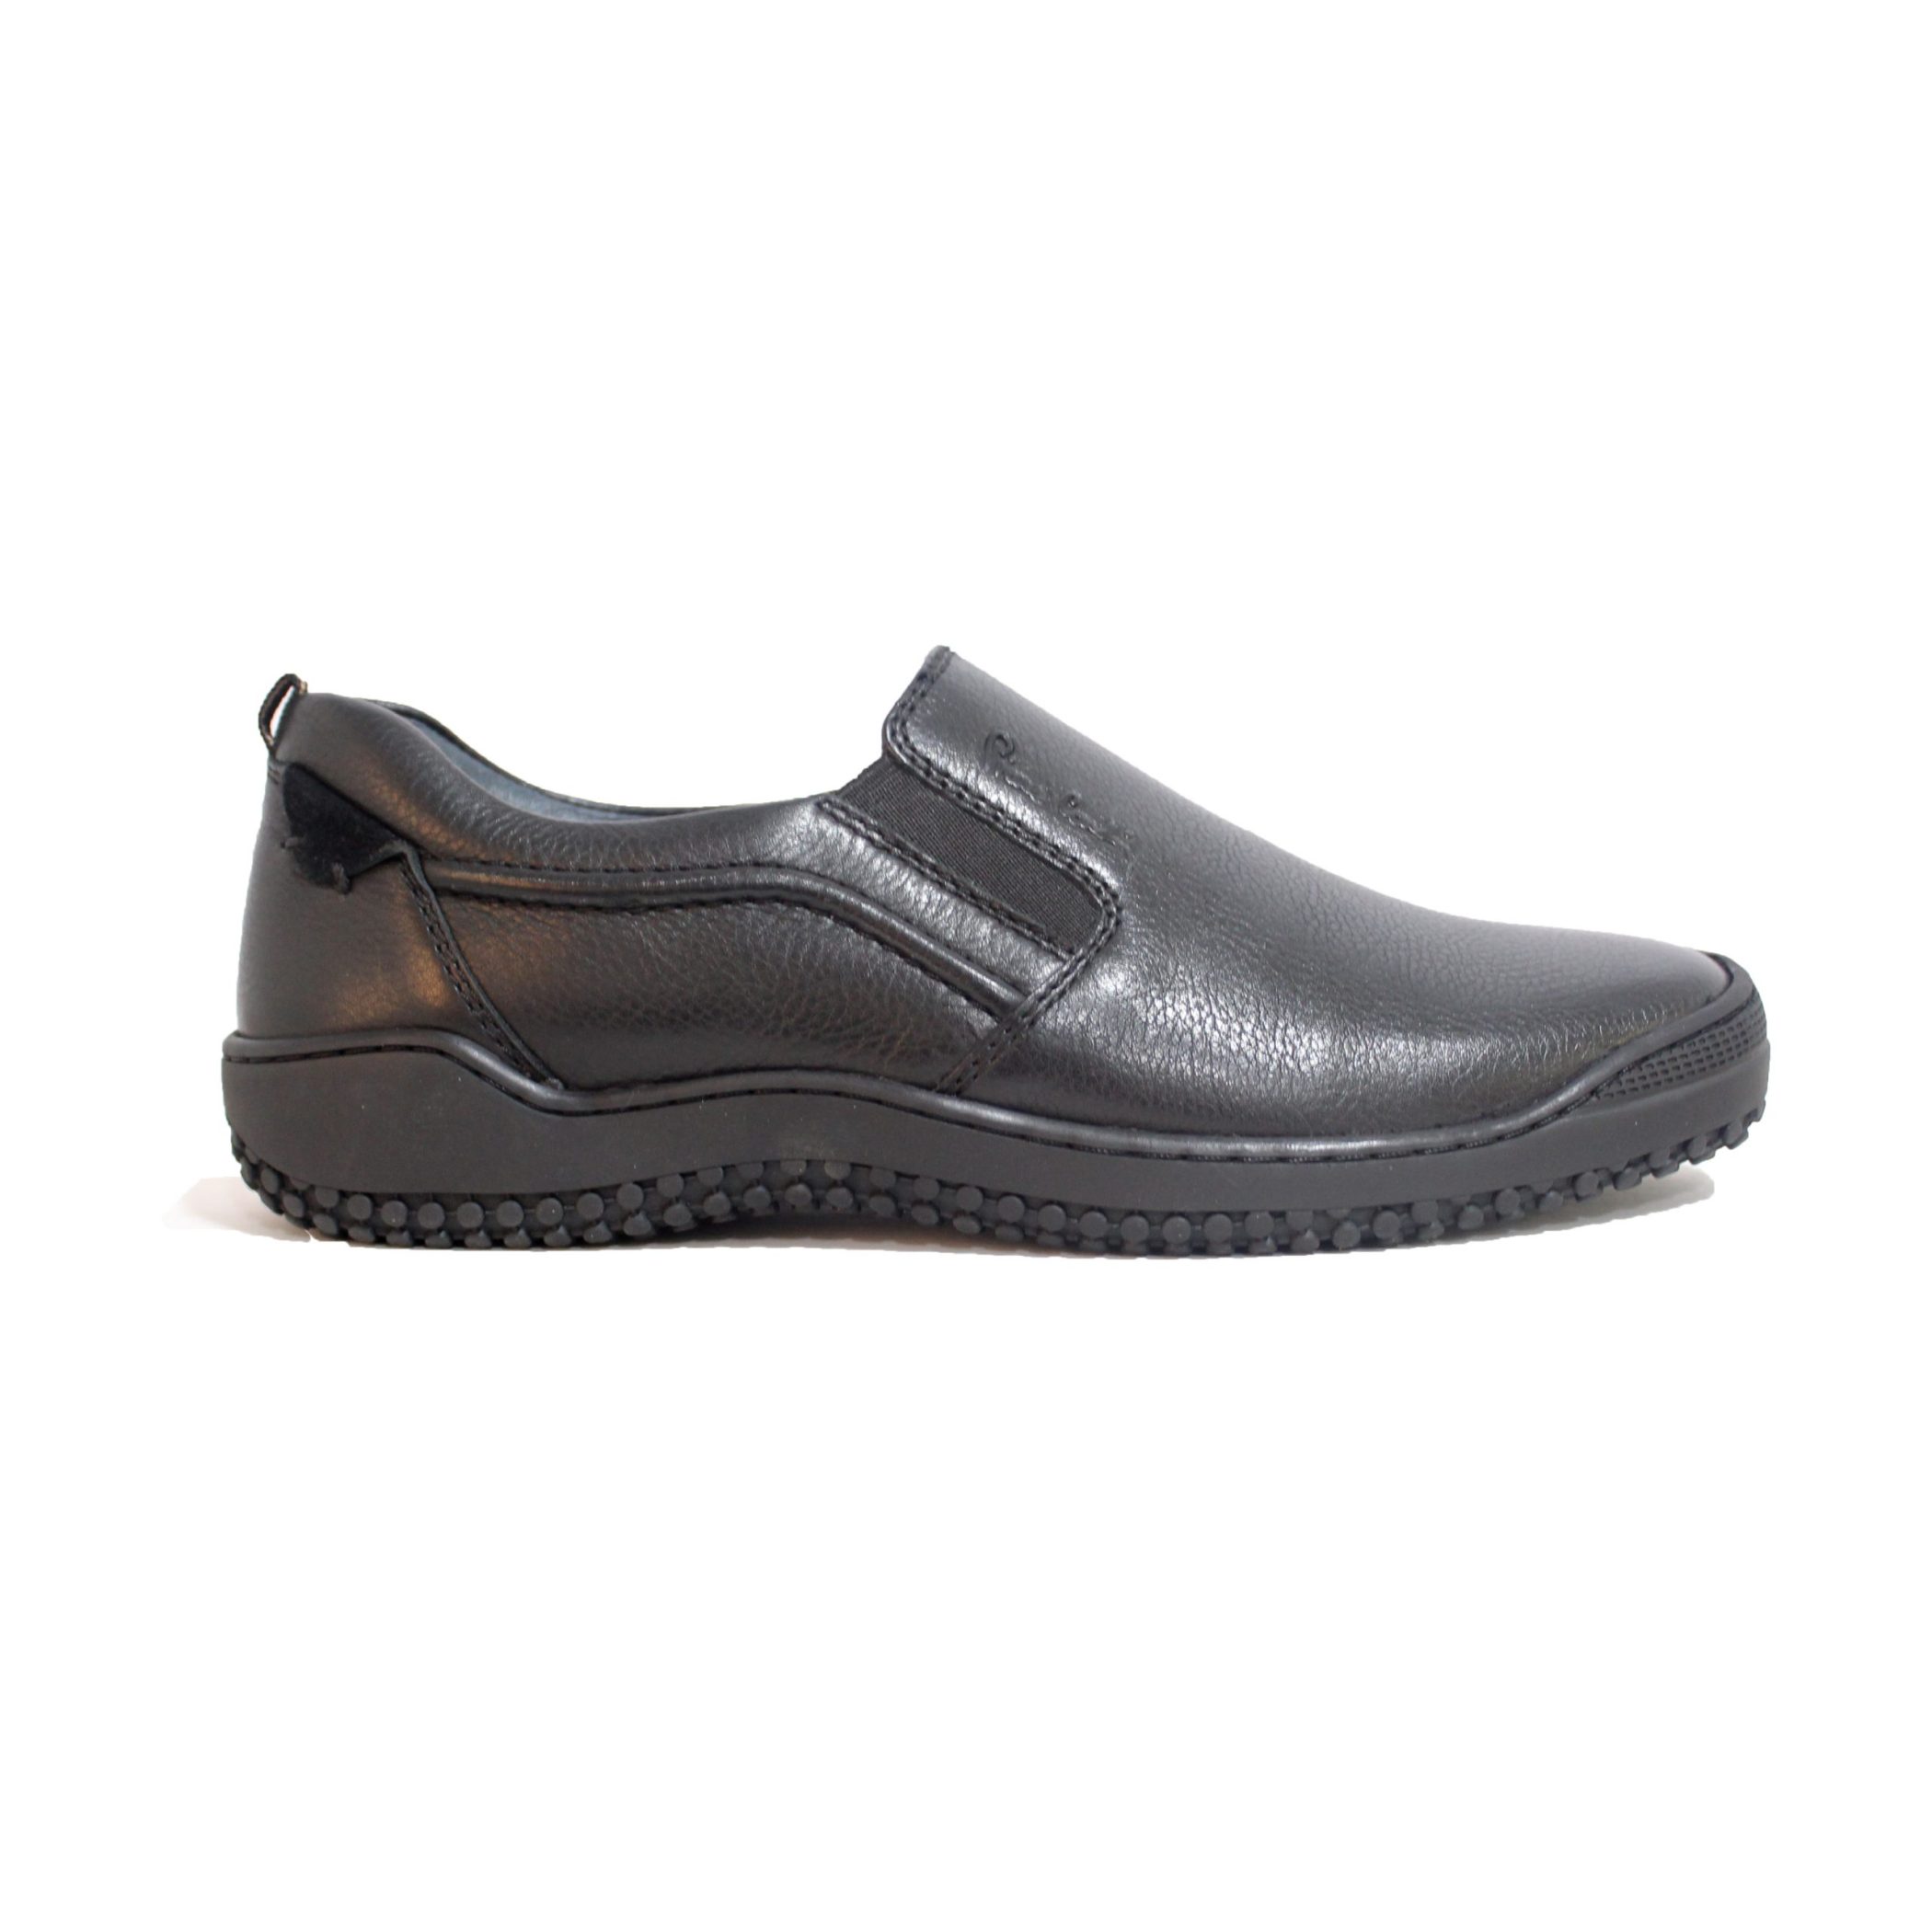 Pierre Cardin Leather slip on shoes for Men. Now in India